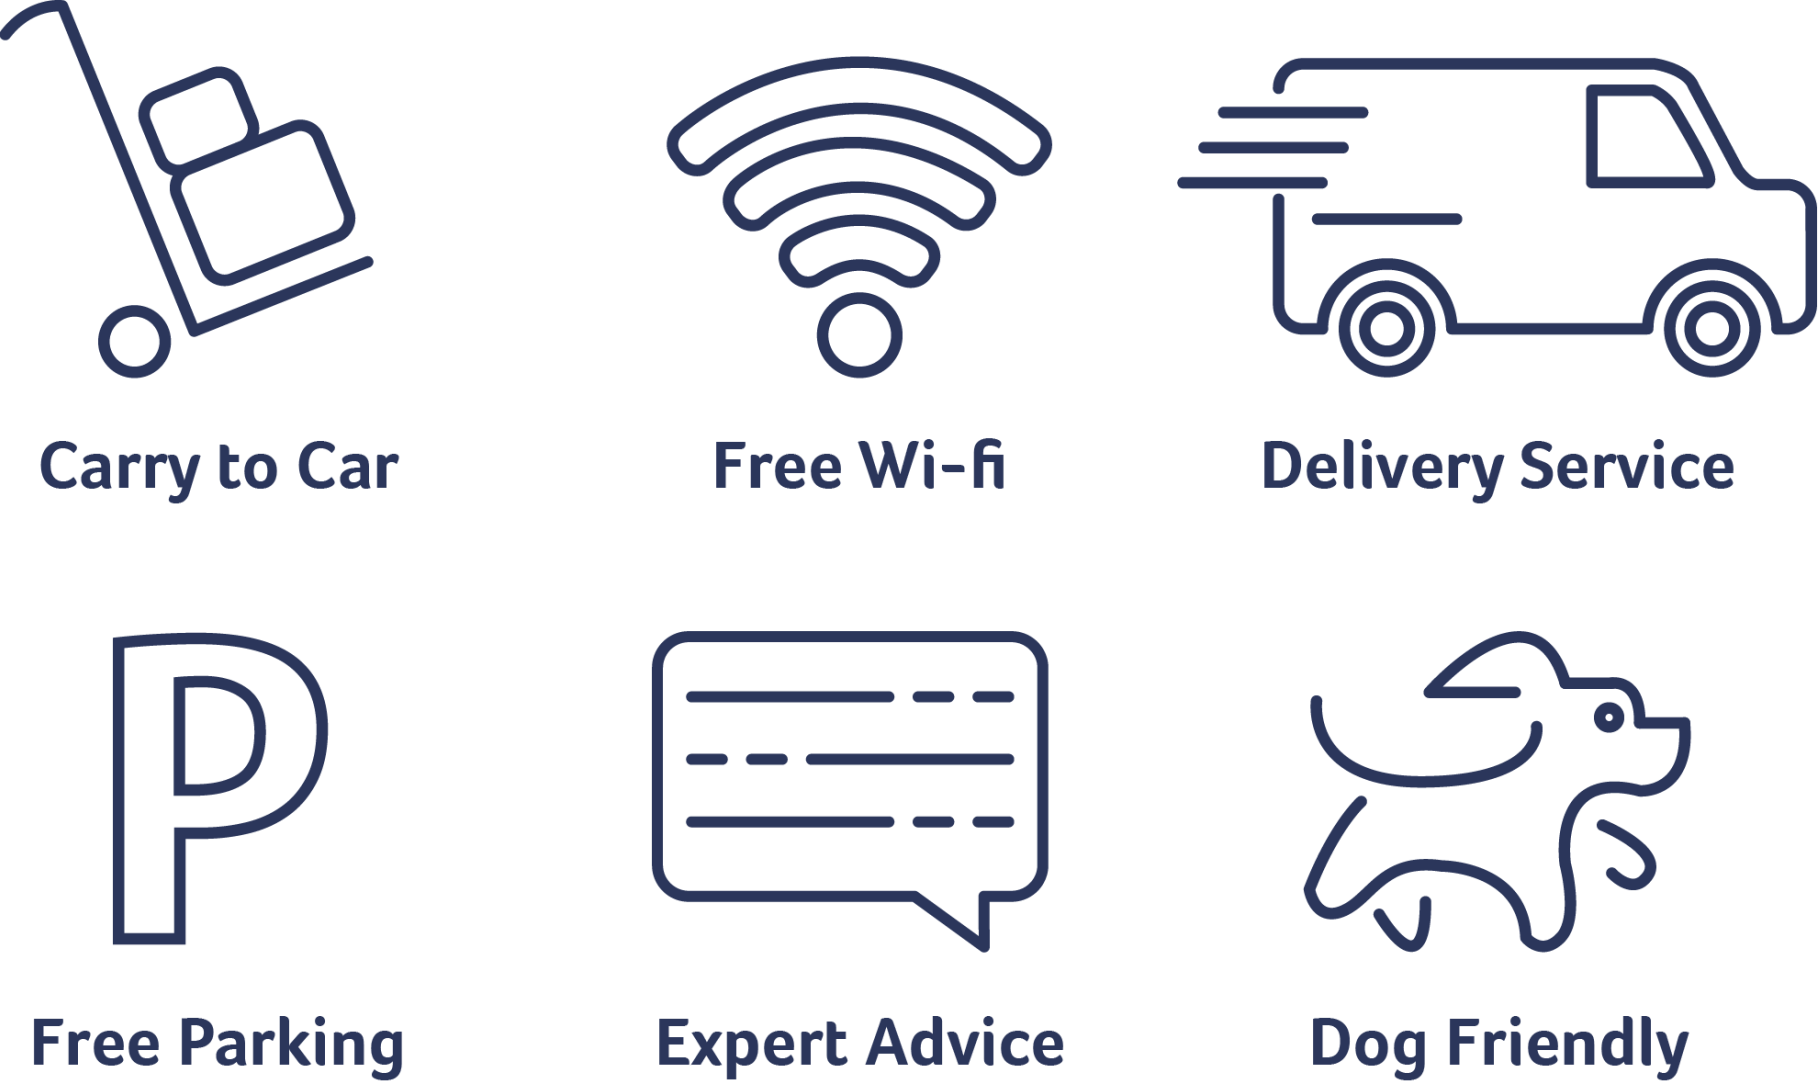 free-wi-fi-free-parking-delivery-service-advice-dog-friendly